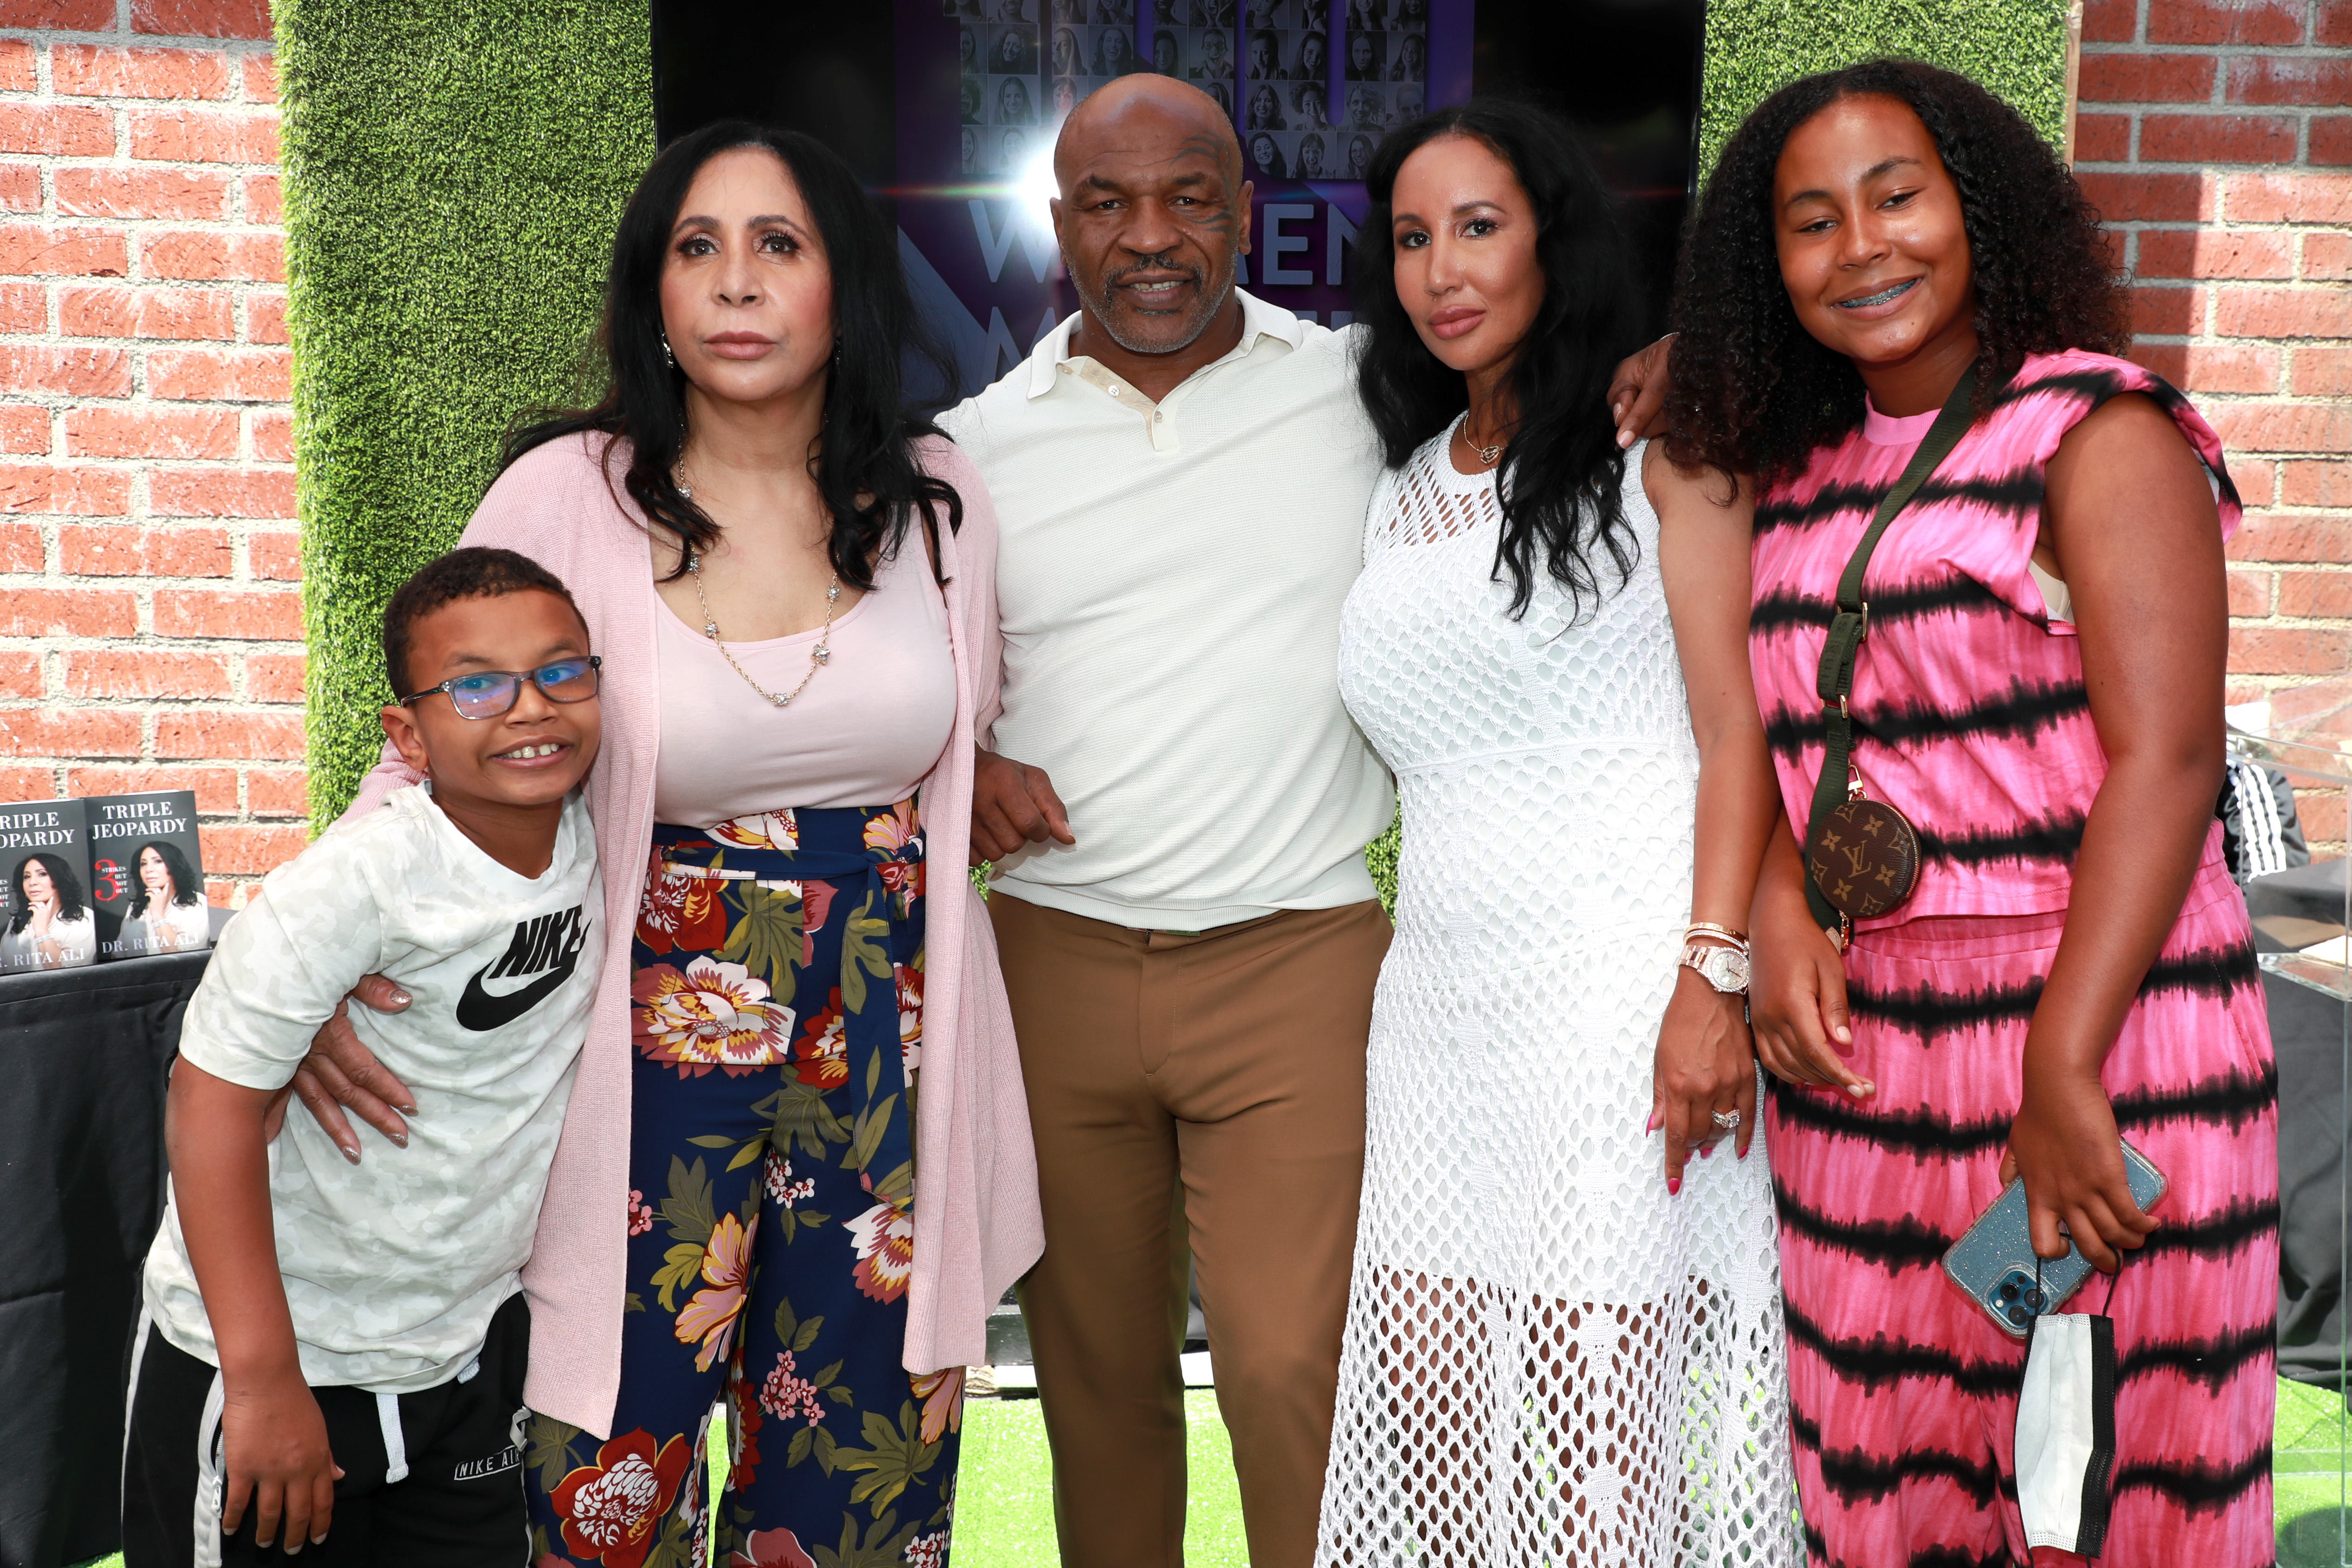 Mike Tyson, alongside his son Morocco, mother-in-law Rita Ali, wife Lakiha "Kiki" Spicer, and daughter Milan Tyson, at the 100 Women Matter Luncheon on May 8, 2021, in El Segundo, California | Source: Getty Images